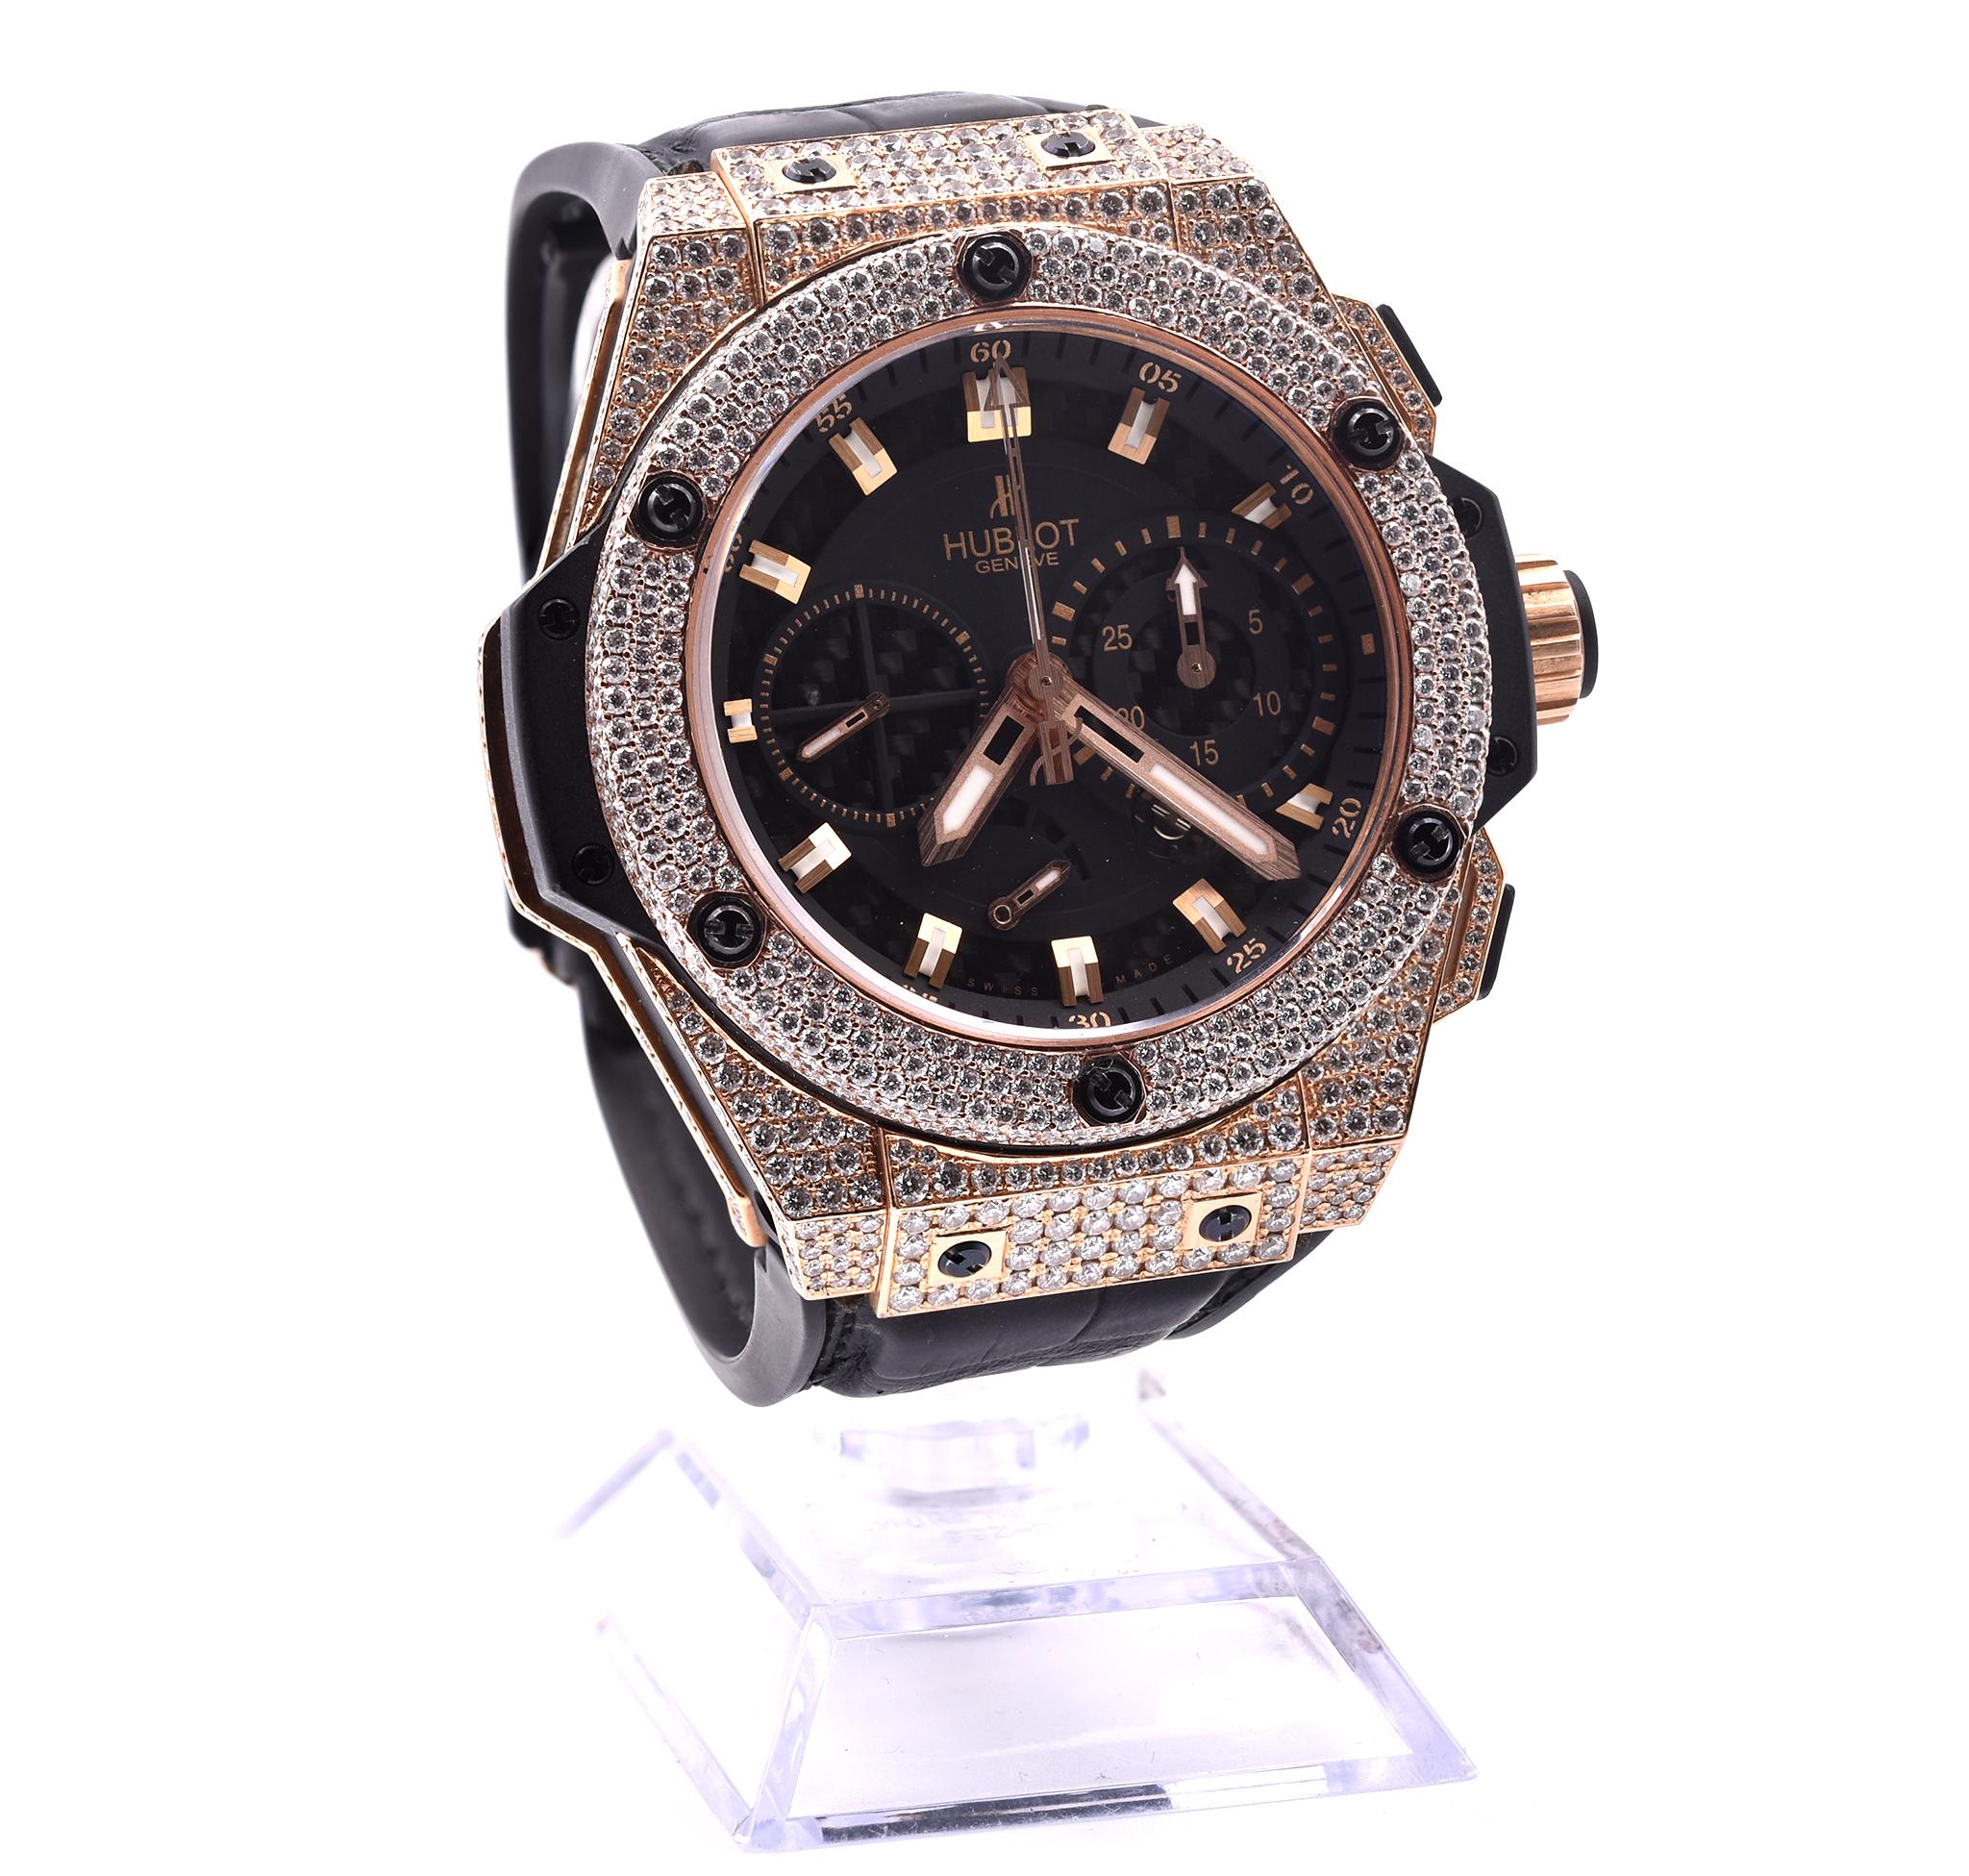 Movement: automatic Hublot Caliber HUB4143
Function: hour, minute, split seconds, chronograph, power reserve
Case: 48mm 18k rose gold case with custom diamond bezel with sapphire exhibition case back, sapphire protective crystal, screw-down crown